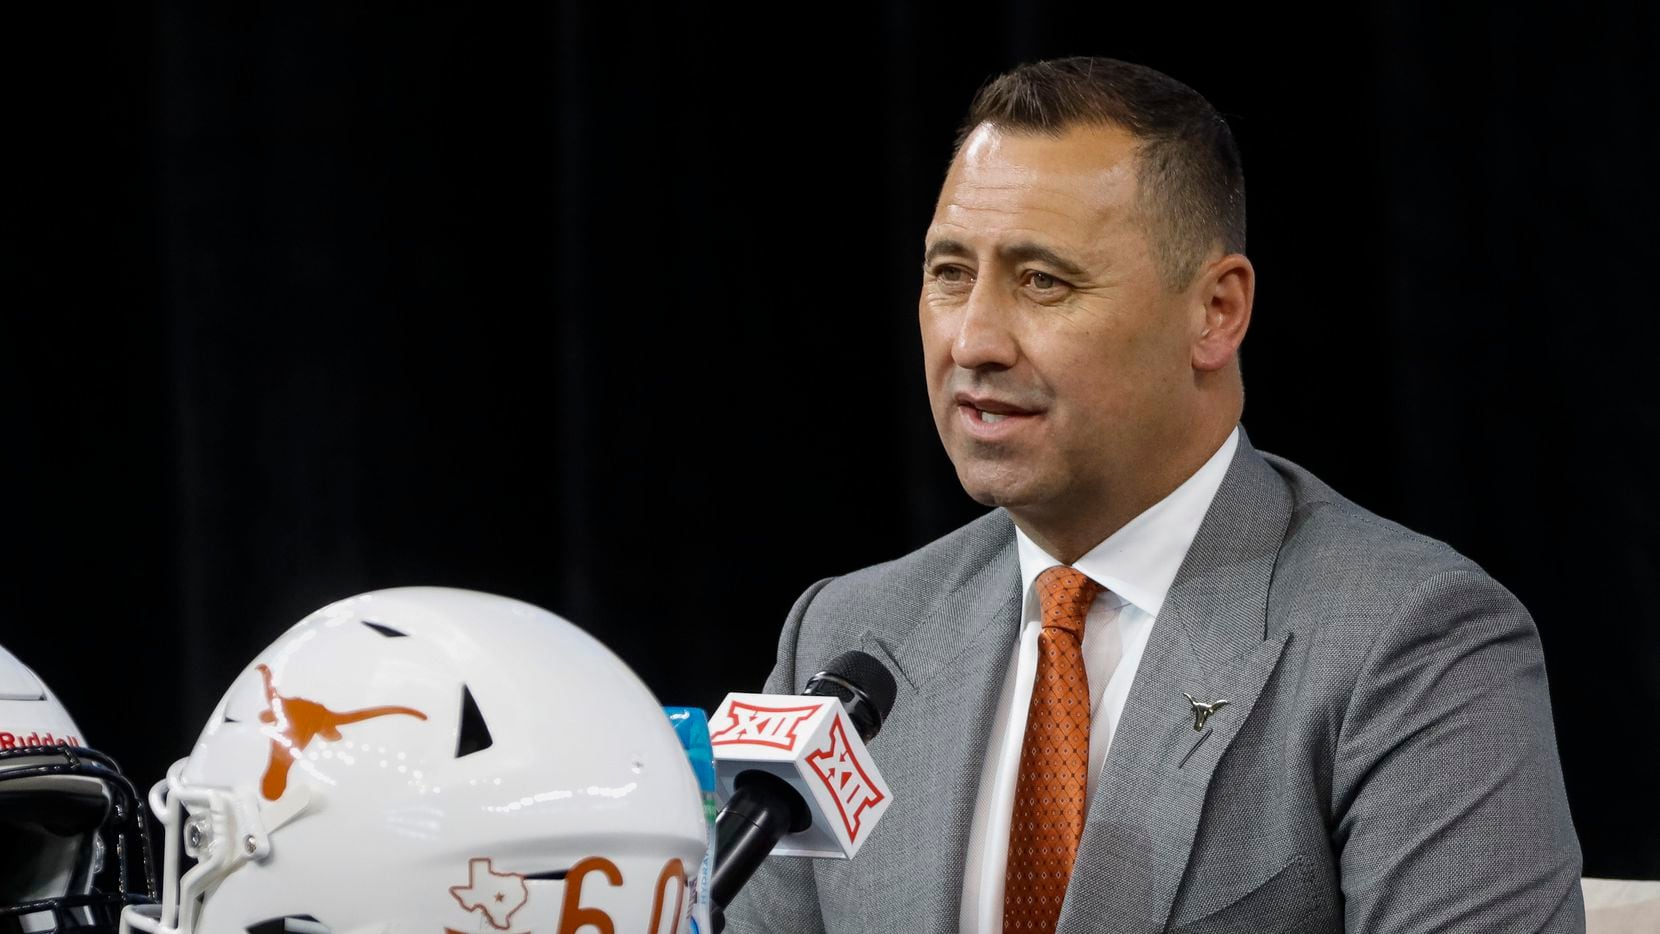 Texas head football coach Steve Sarkisian speaks during the Big 12 Conference Media Days at AT&T Stadium on Thursday, July 15, 2021, in Arlington.